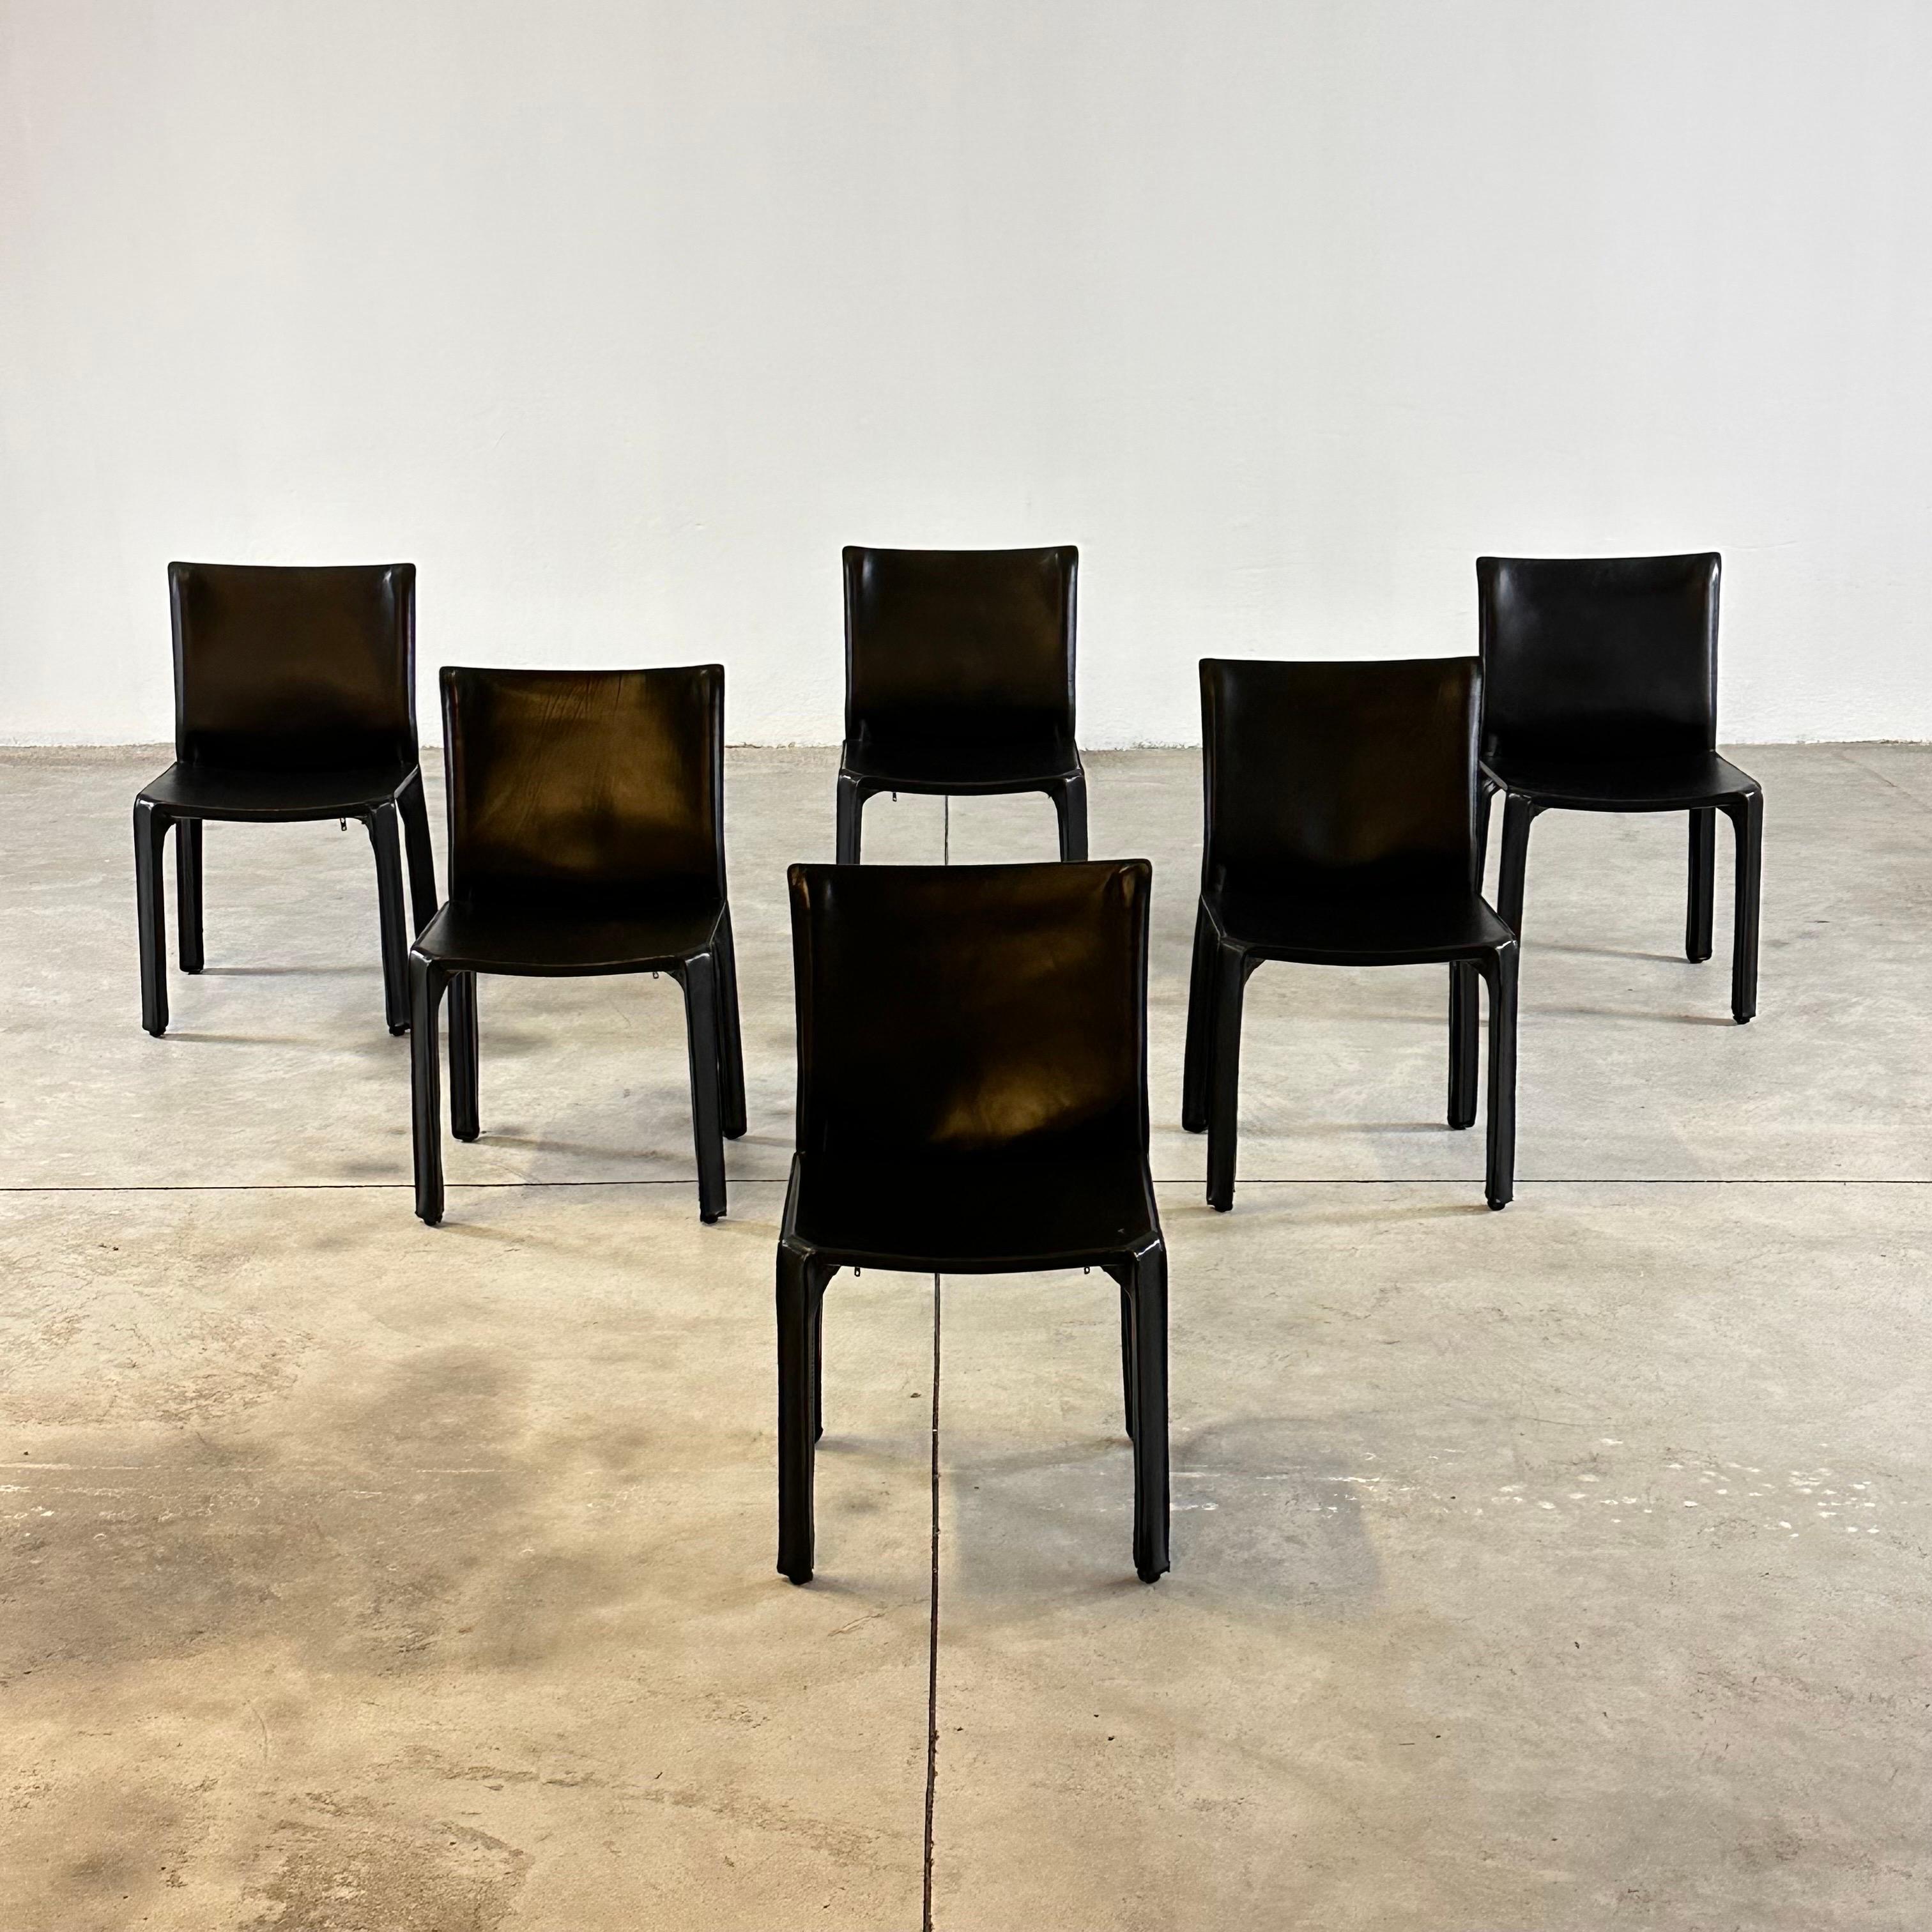 A set of six Italian design icons in black saddle leather.

When first produced in 1977, the CAB was the first chair to feature a free-standing leather structure, inspired by how human skin fits over our skeleton. The leather upholstery is